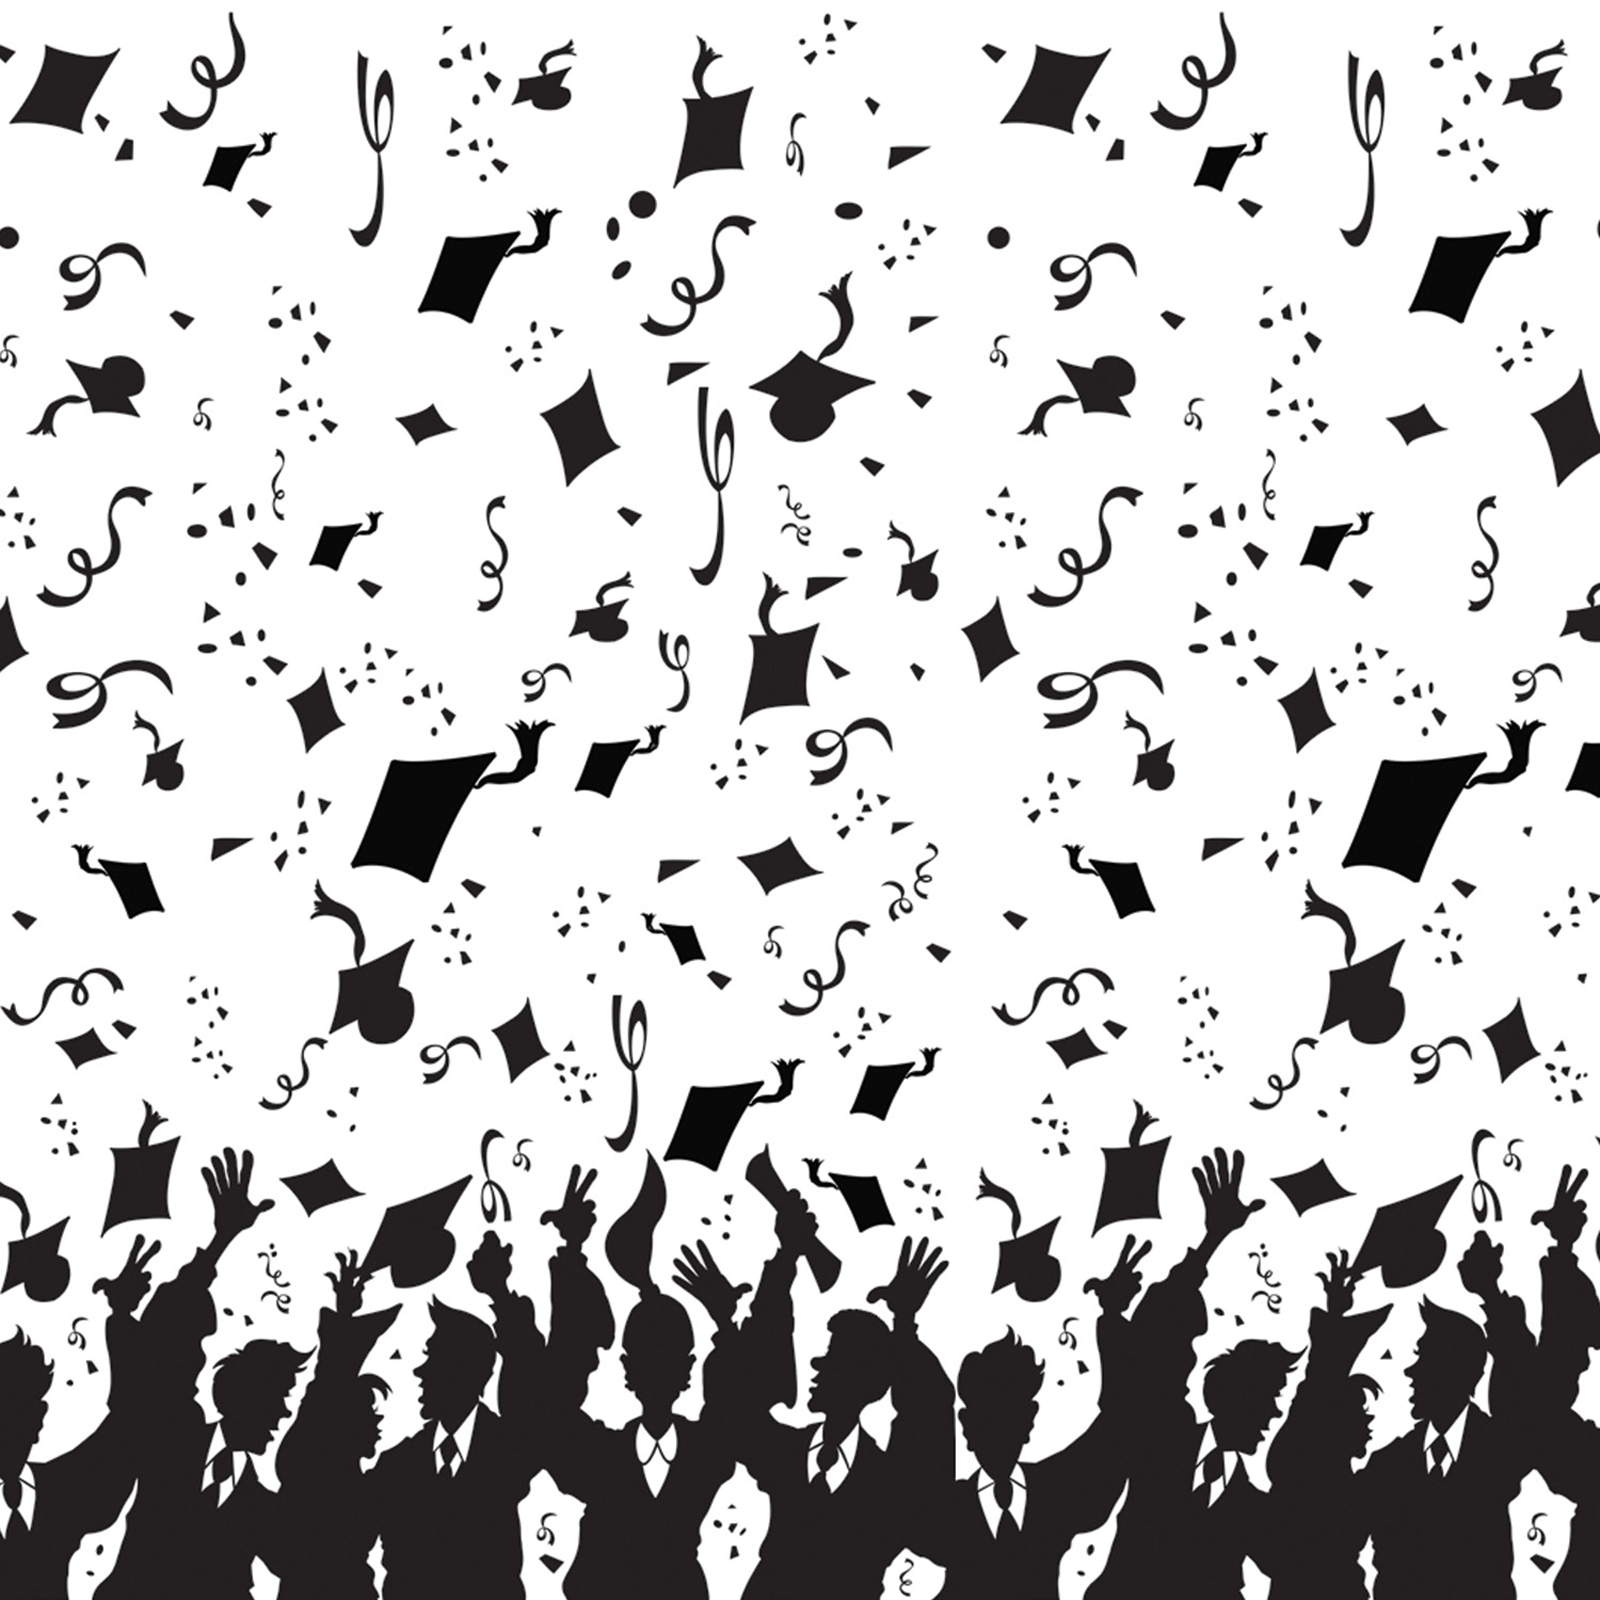 15 Graduation Clip Art 2014 Free Cliparts That You Can Download To You